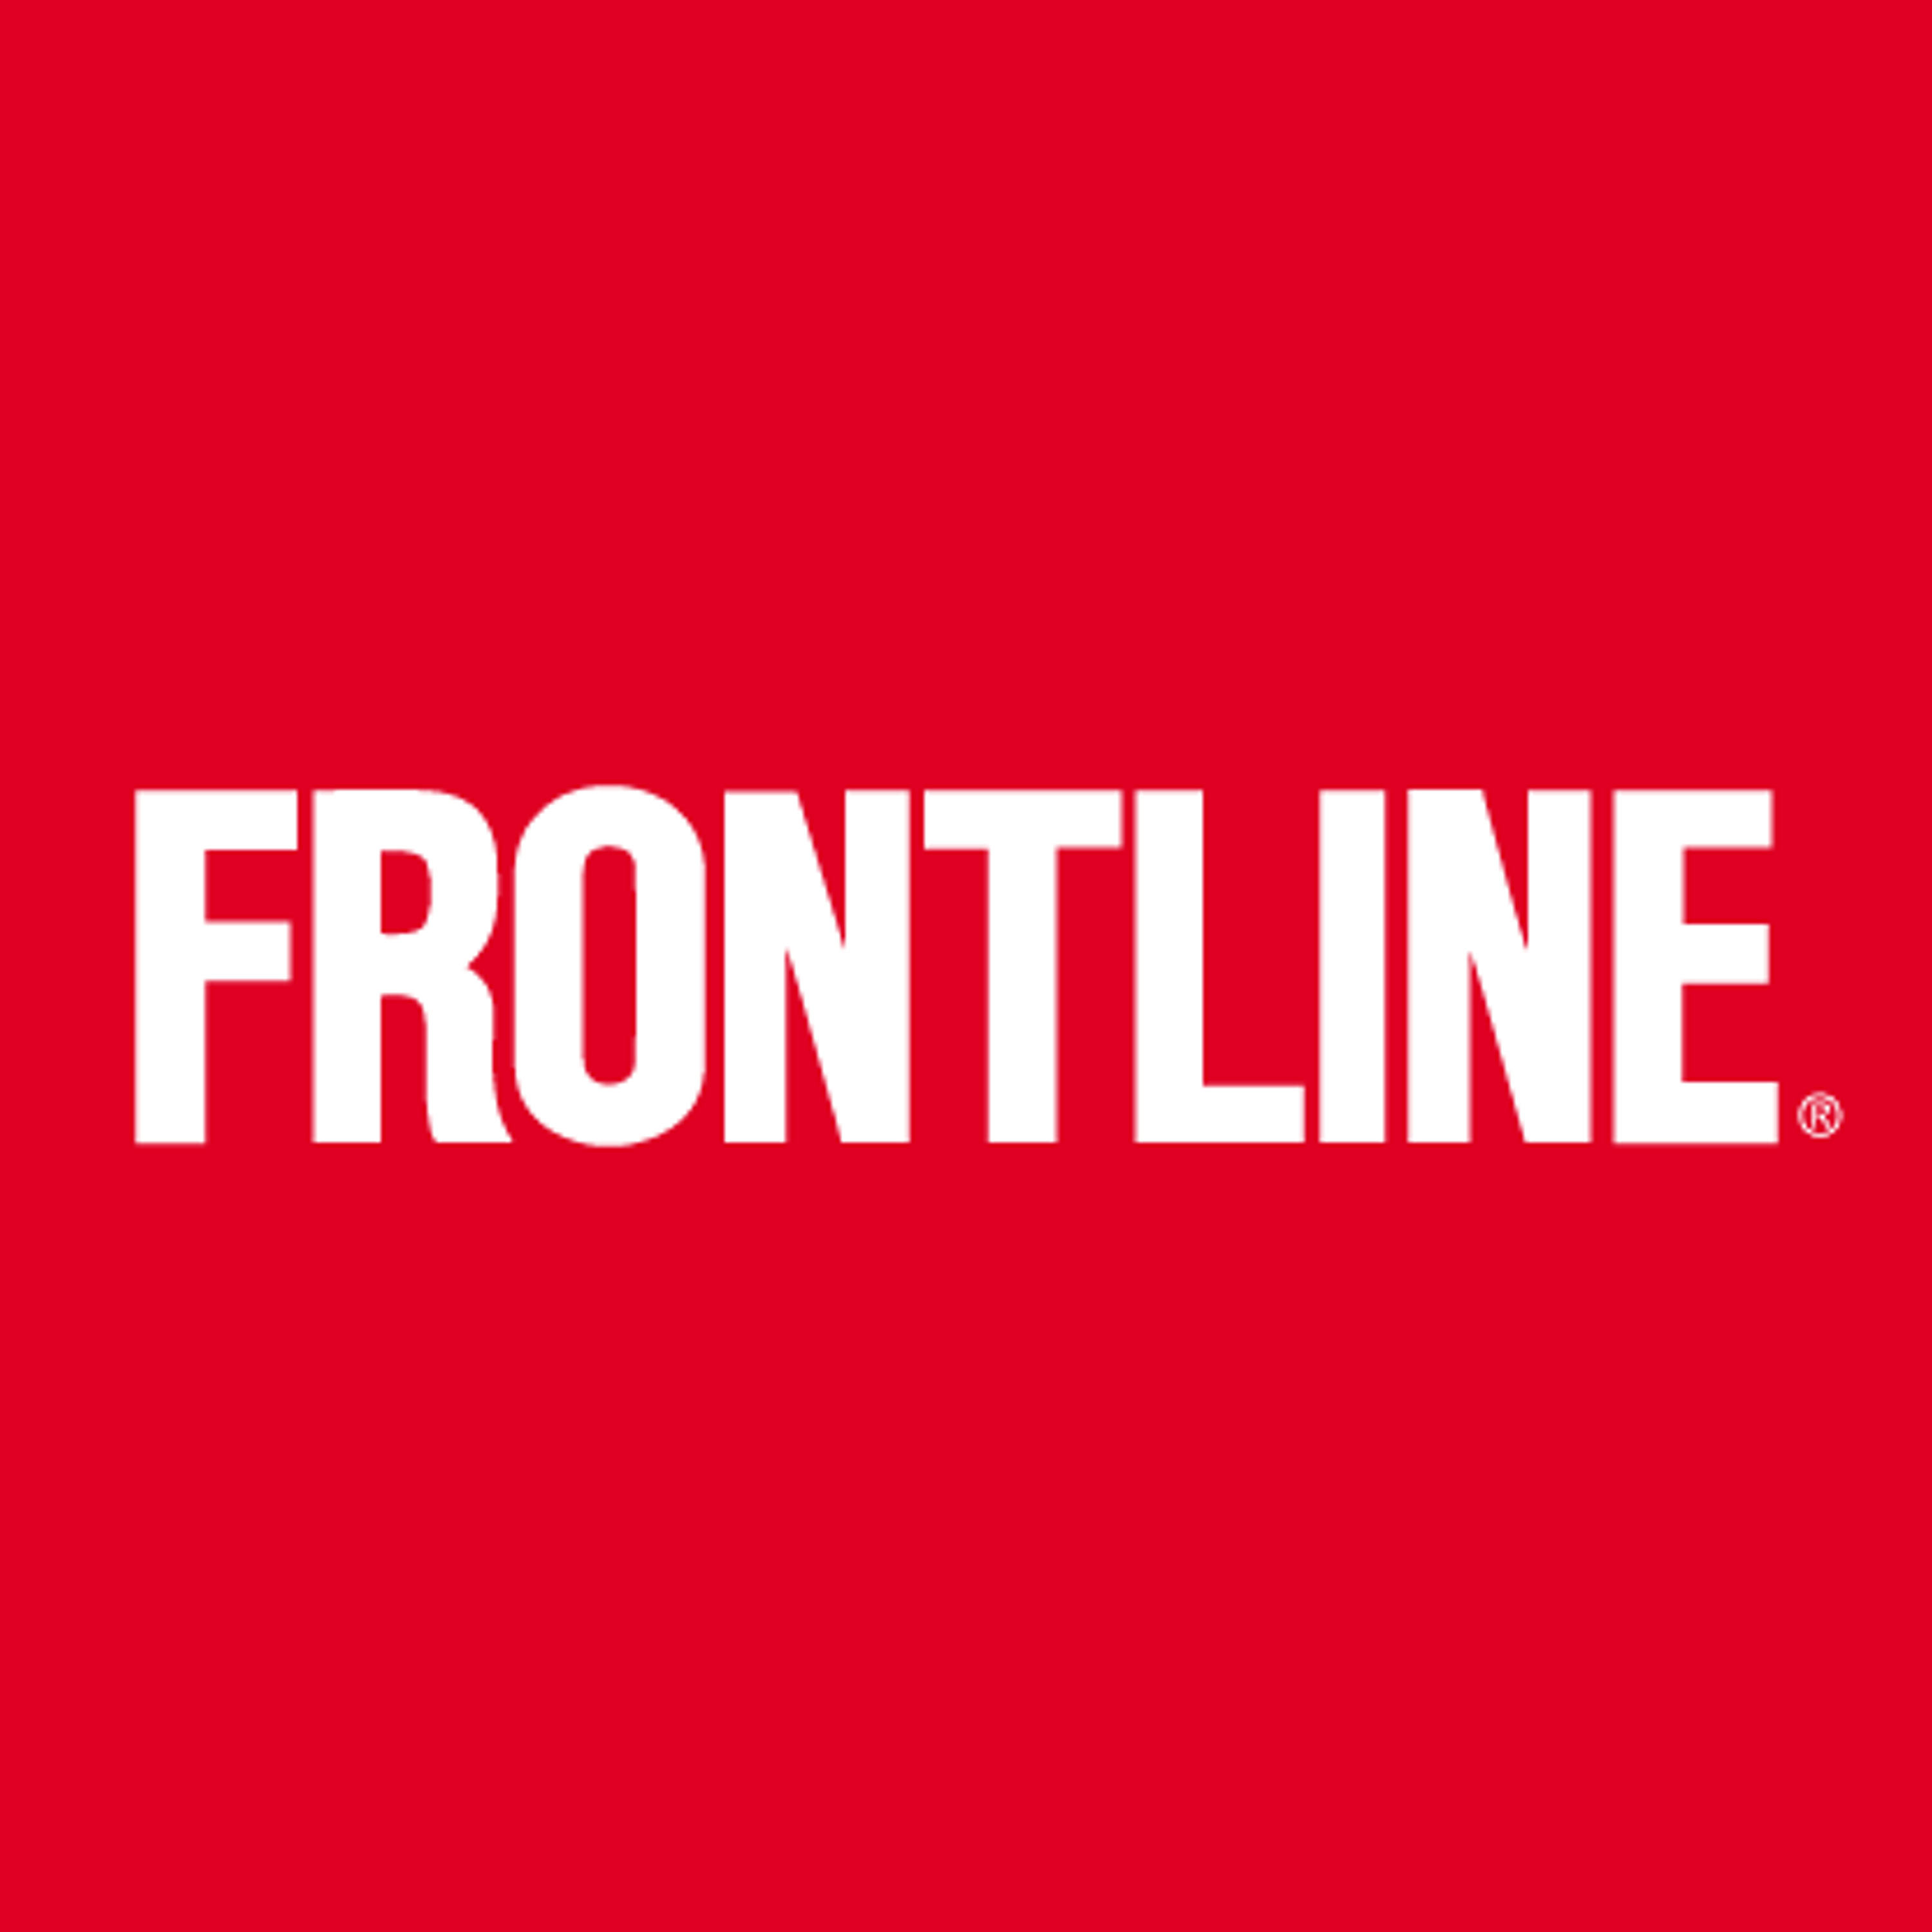 Frontline Roundtable: Corporate Social Responsibility